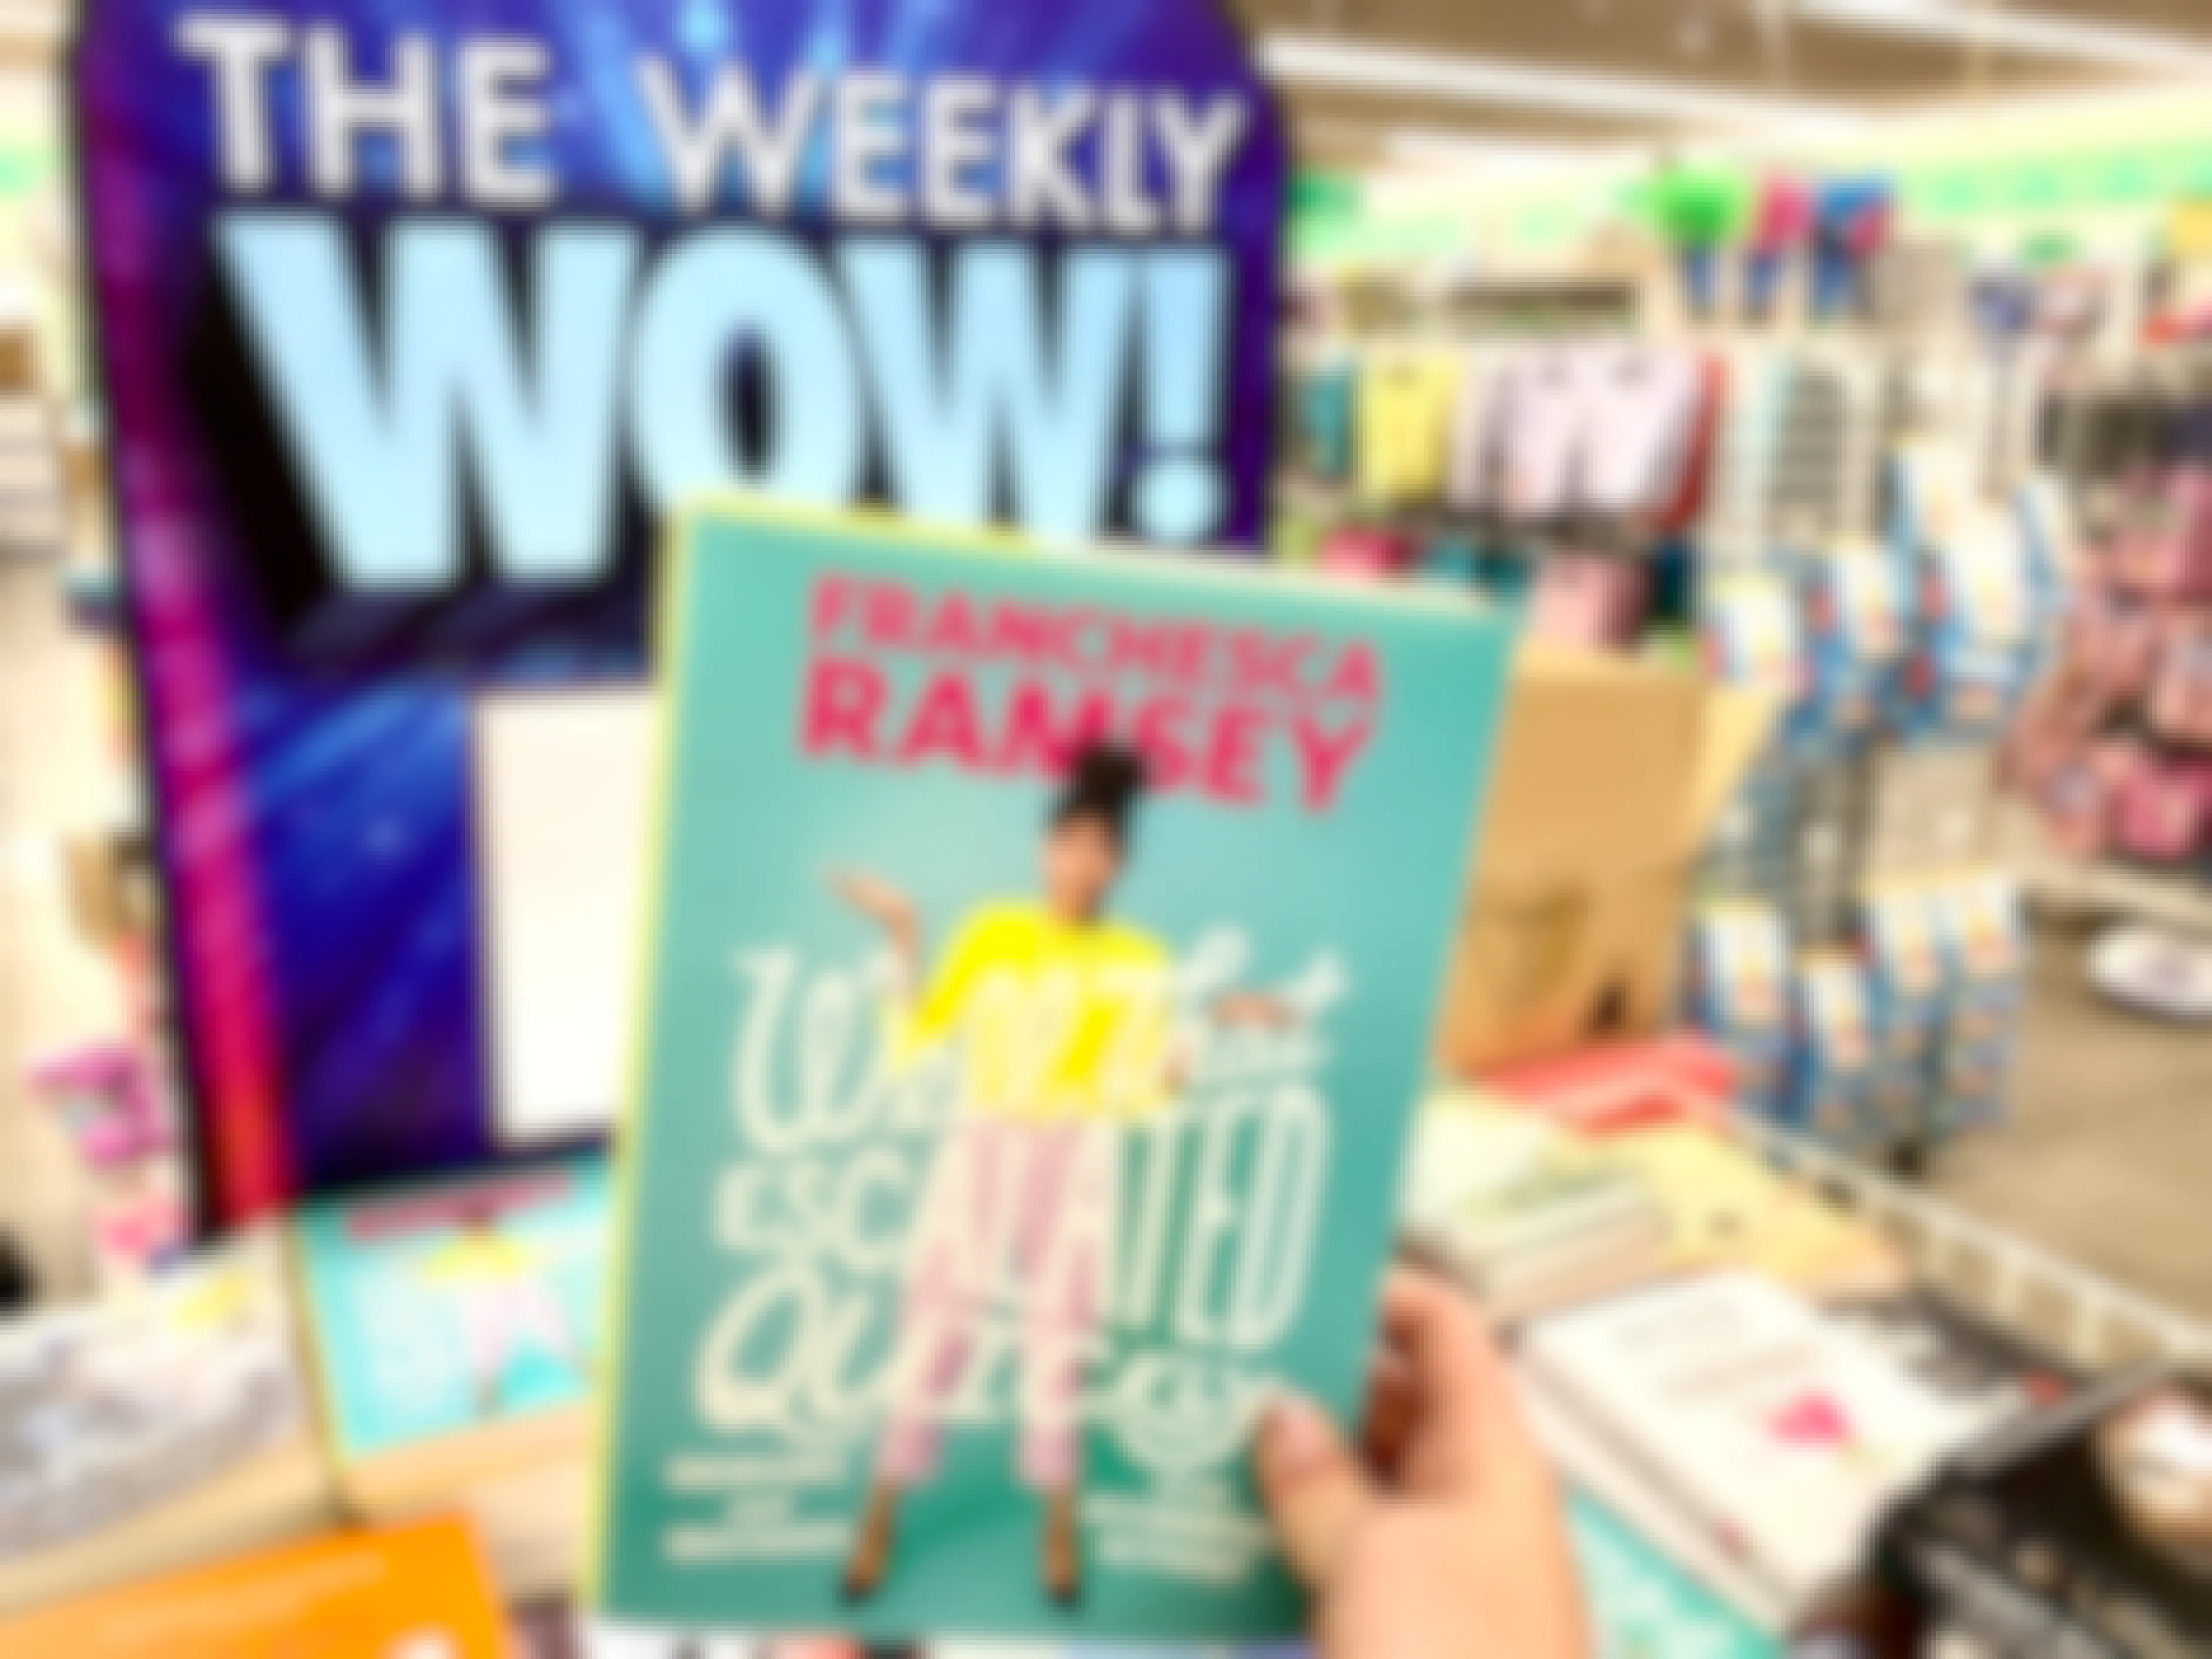 a book being held in front of the weekly wow sign in the Dollar Tree store